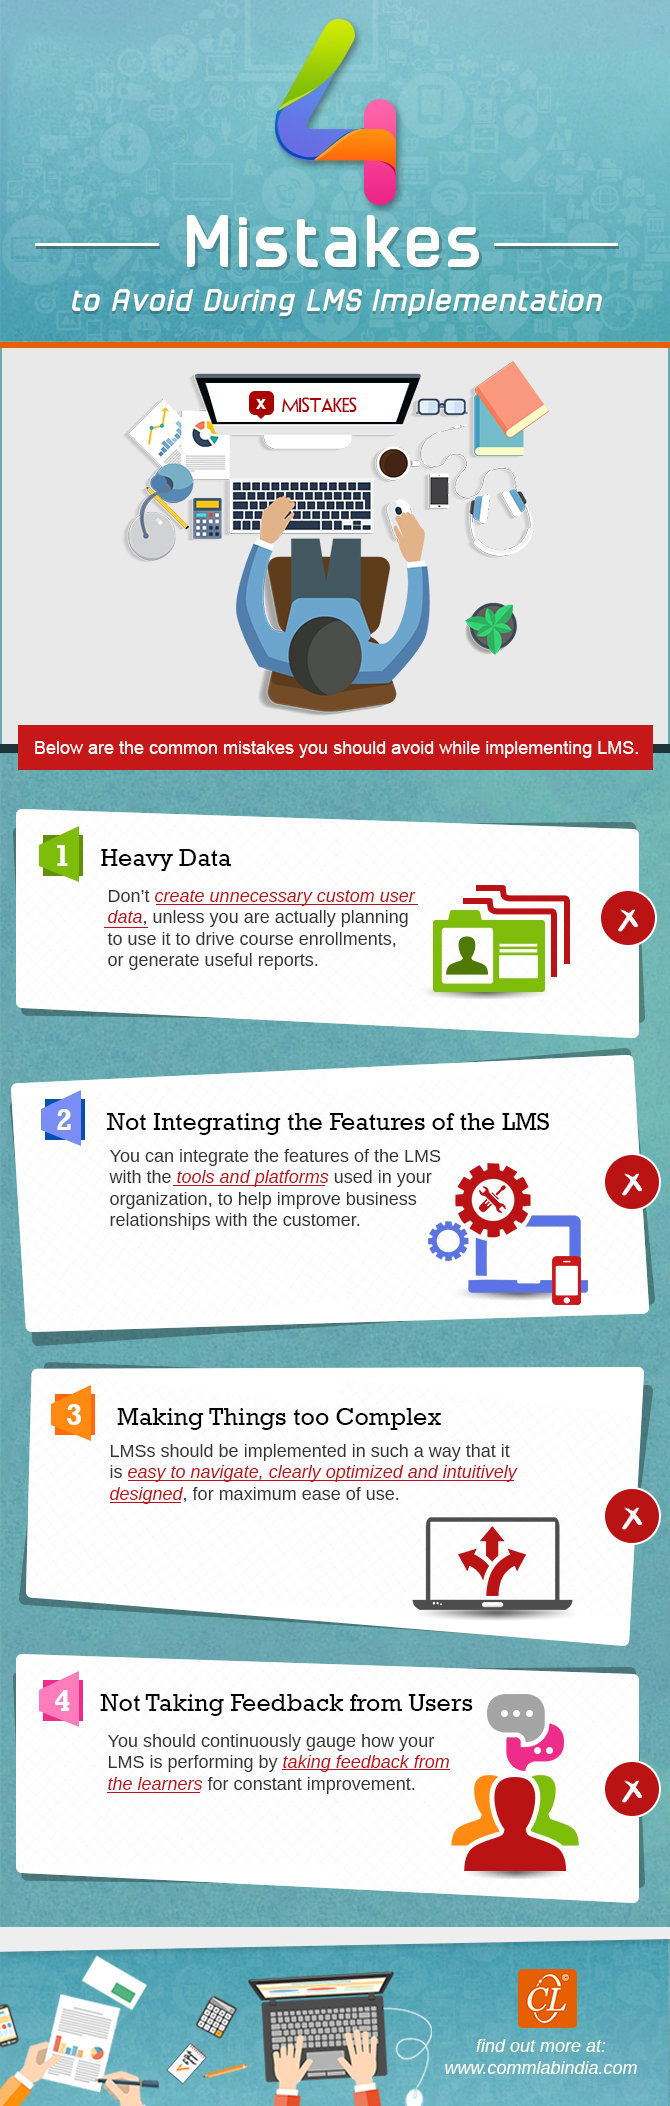 4 Mistakes to Avoid During LMS Implementation [Infographic]